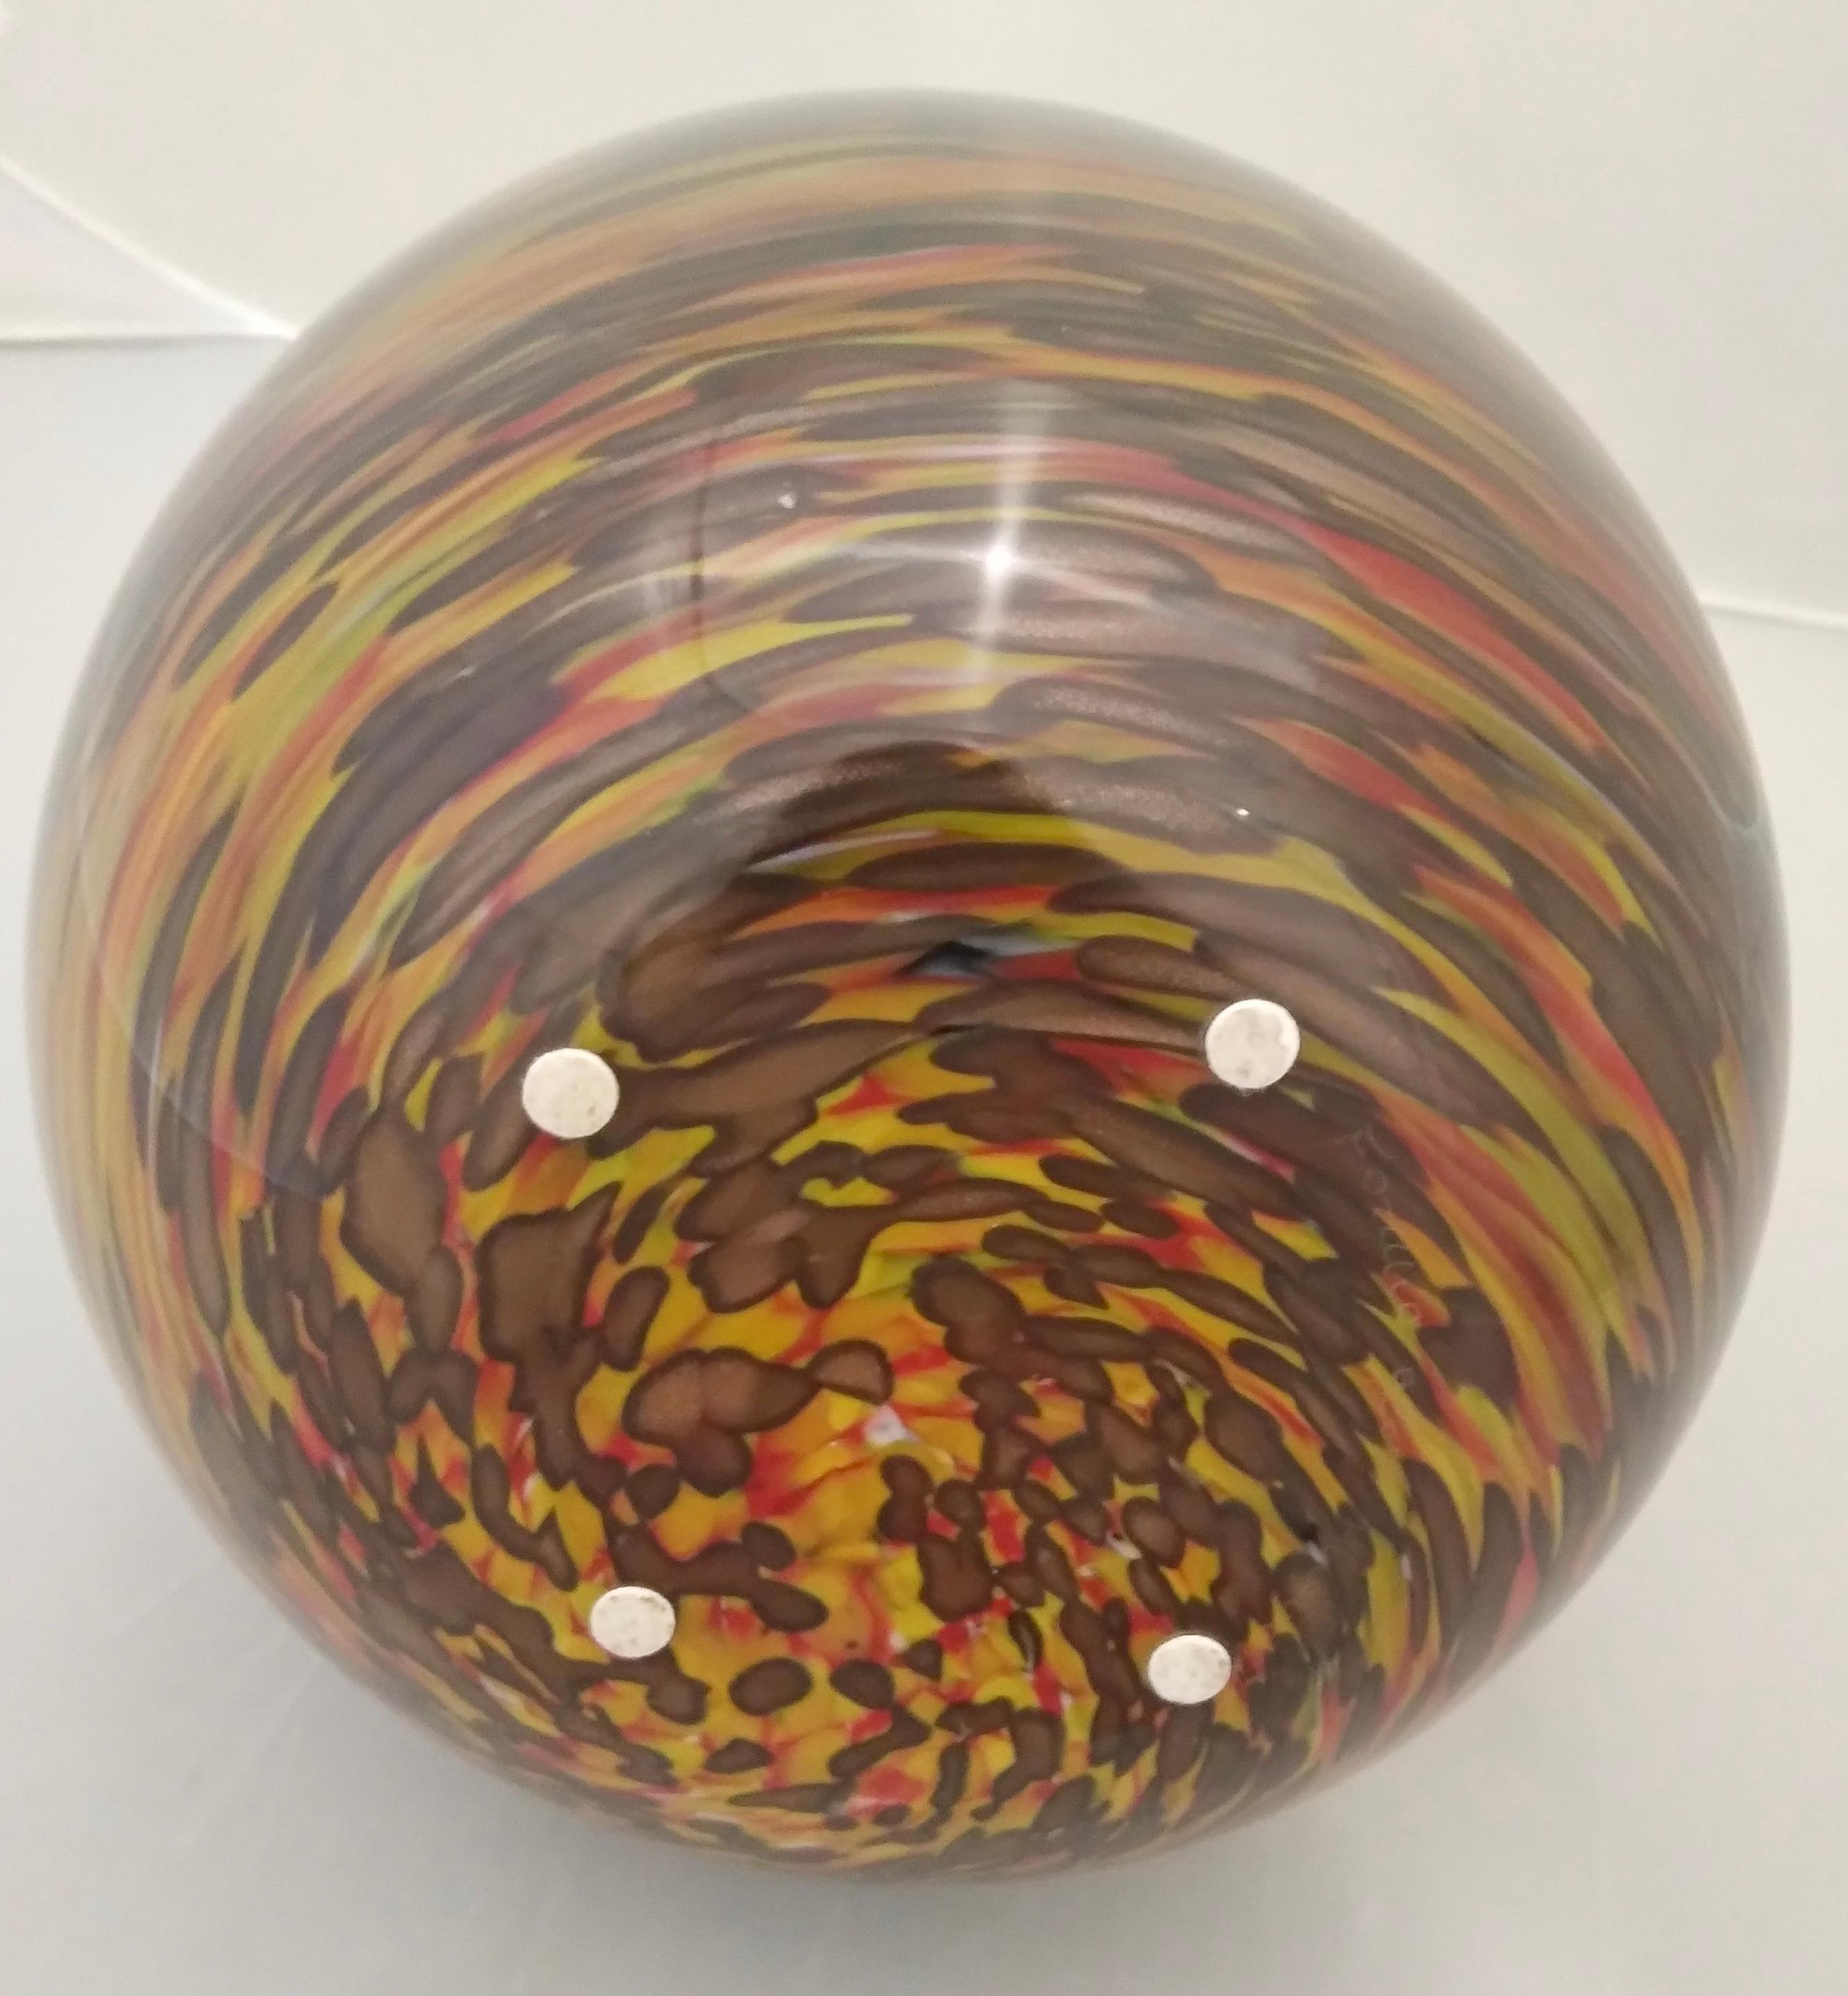 Formia 1980s Modern Ovoid Brown Yellow Red Orange Gold Murano Glass Vase For Sale 2